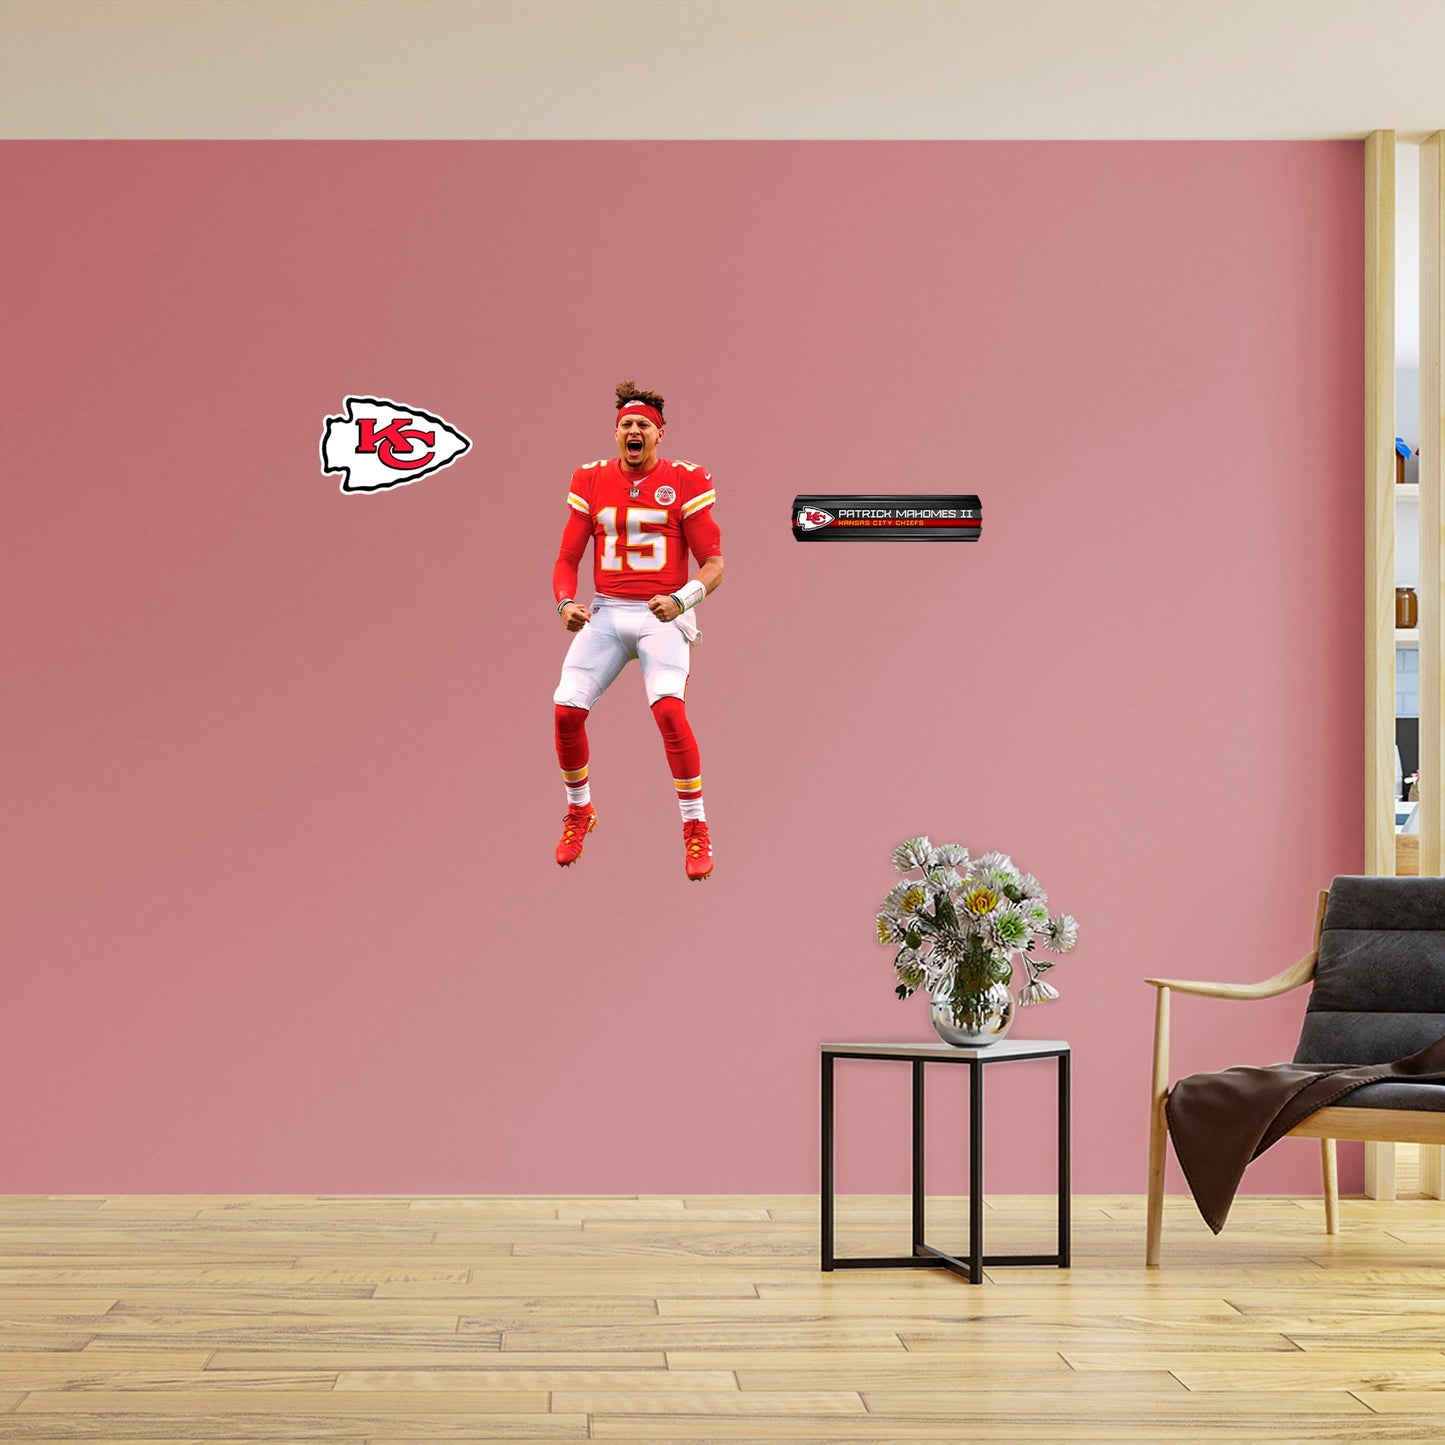 Kansas City Chiefs: Patrick Mahomes II Celebration - Officially Licensed NFL Removable Adhesive Decal